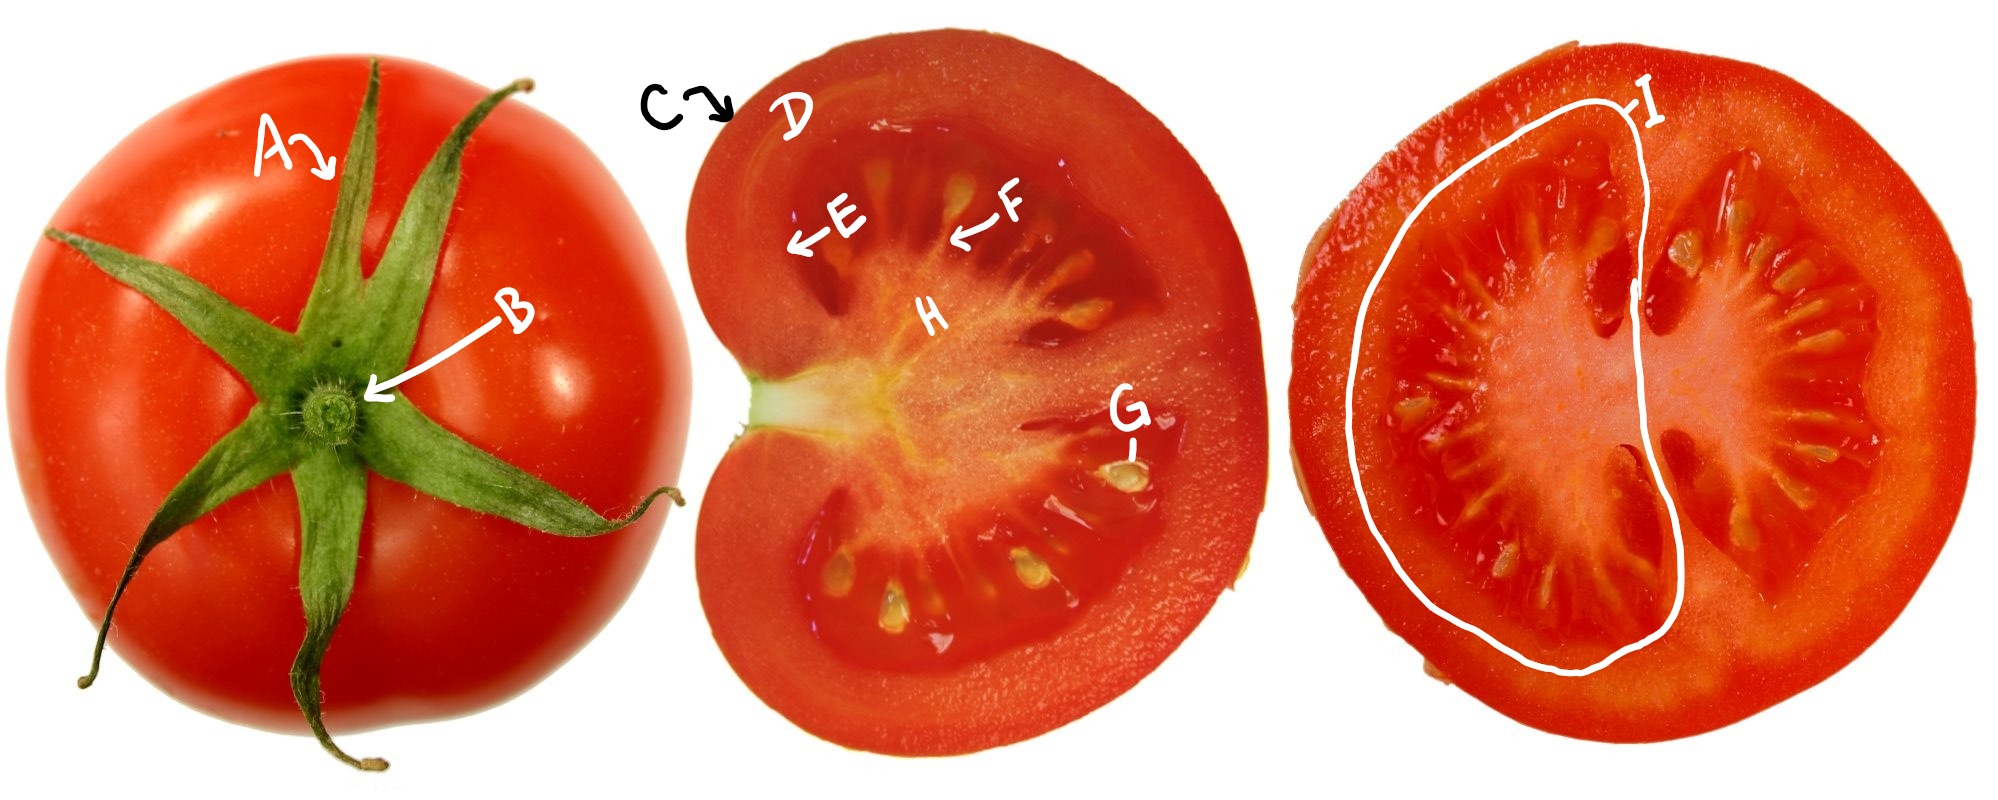 Three tomatoes in different views and sections